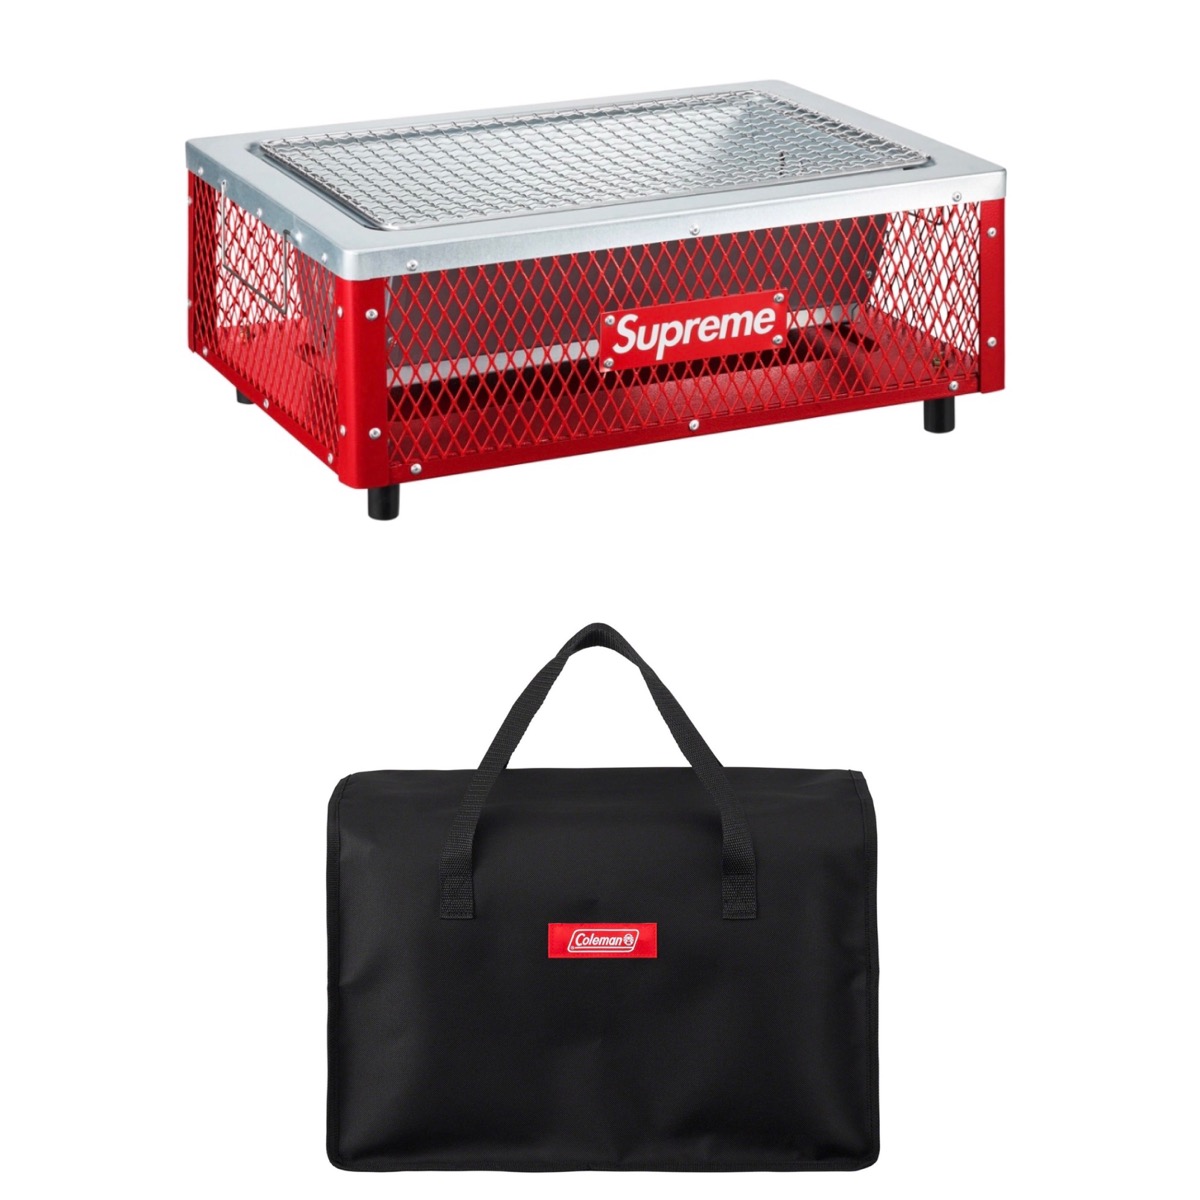 Supreme Coleman Charcoal Grill 